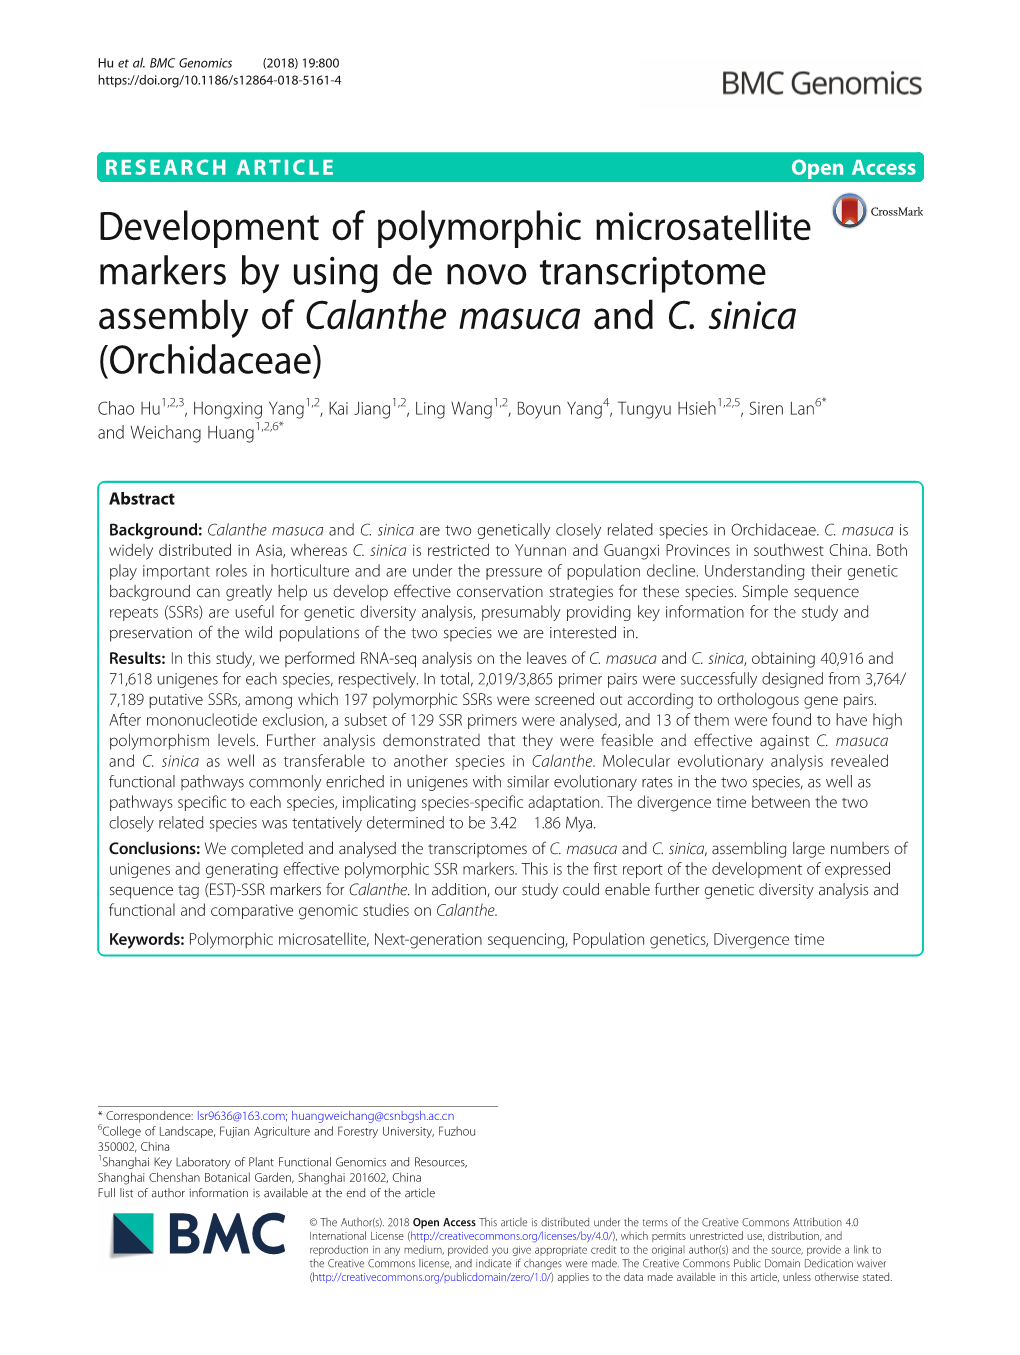 Development of Polymorphic Microsatellite Markers by Using De Novo Transcriptome Assembly of Calanthe Masuca and C